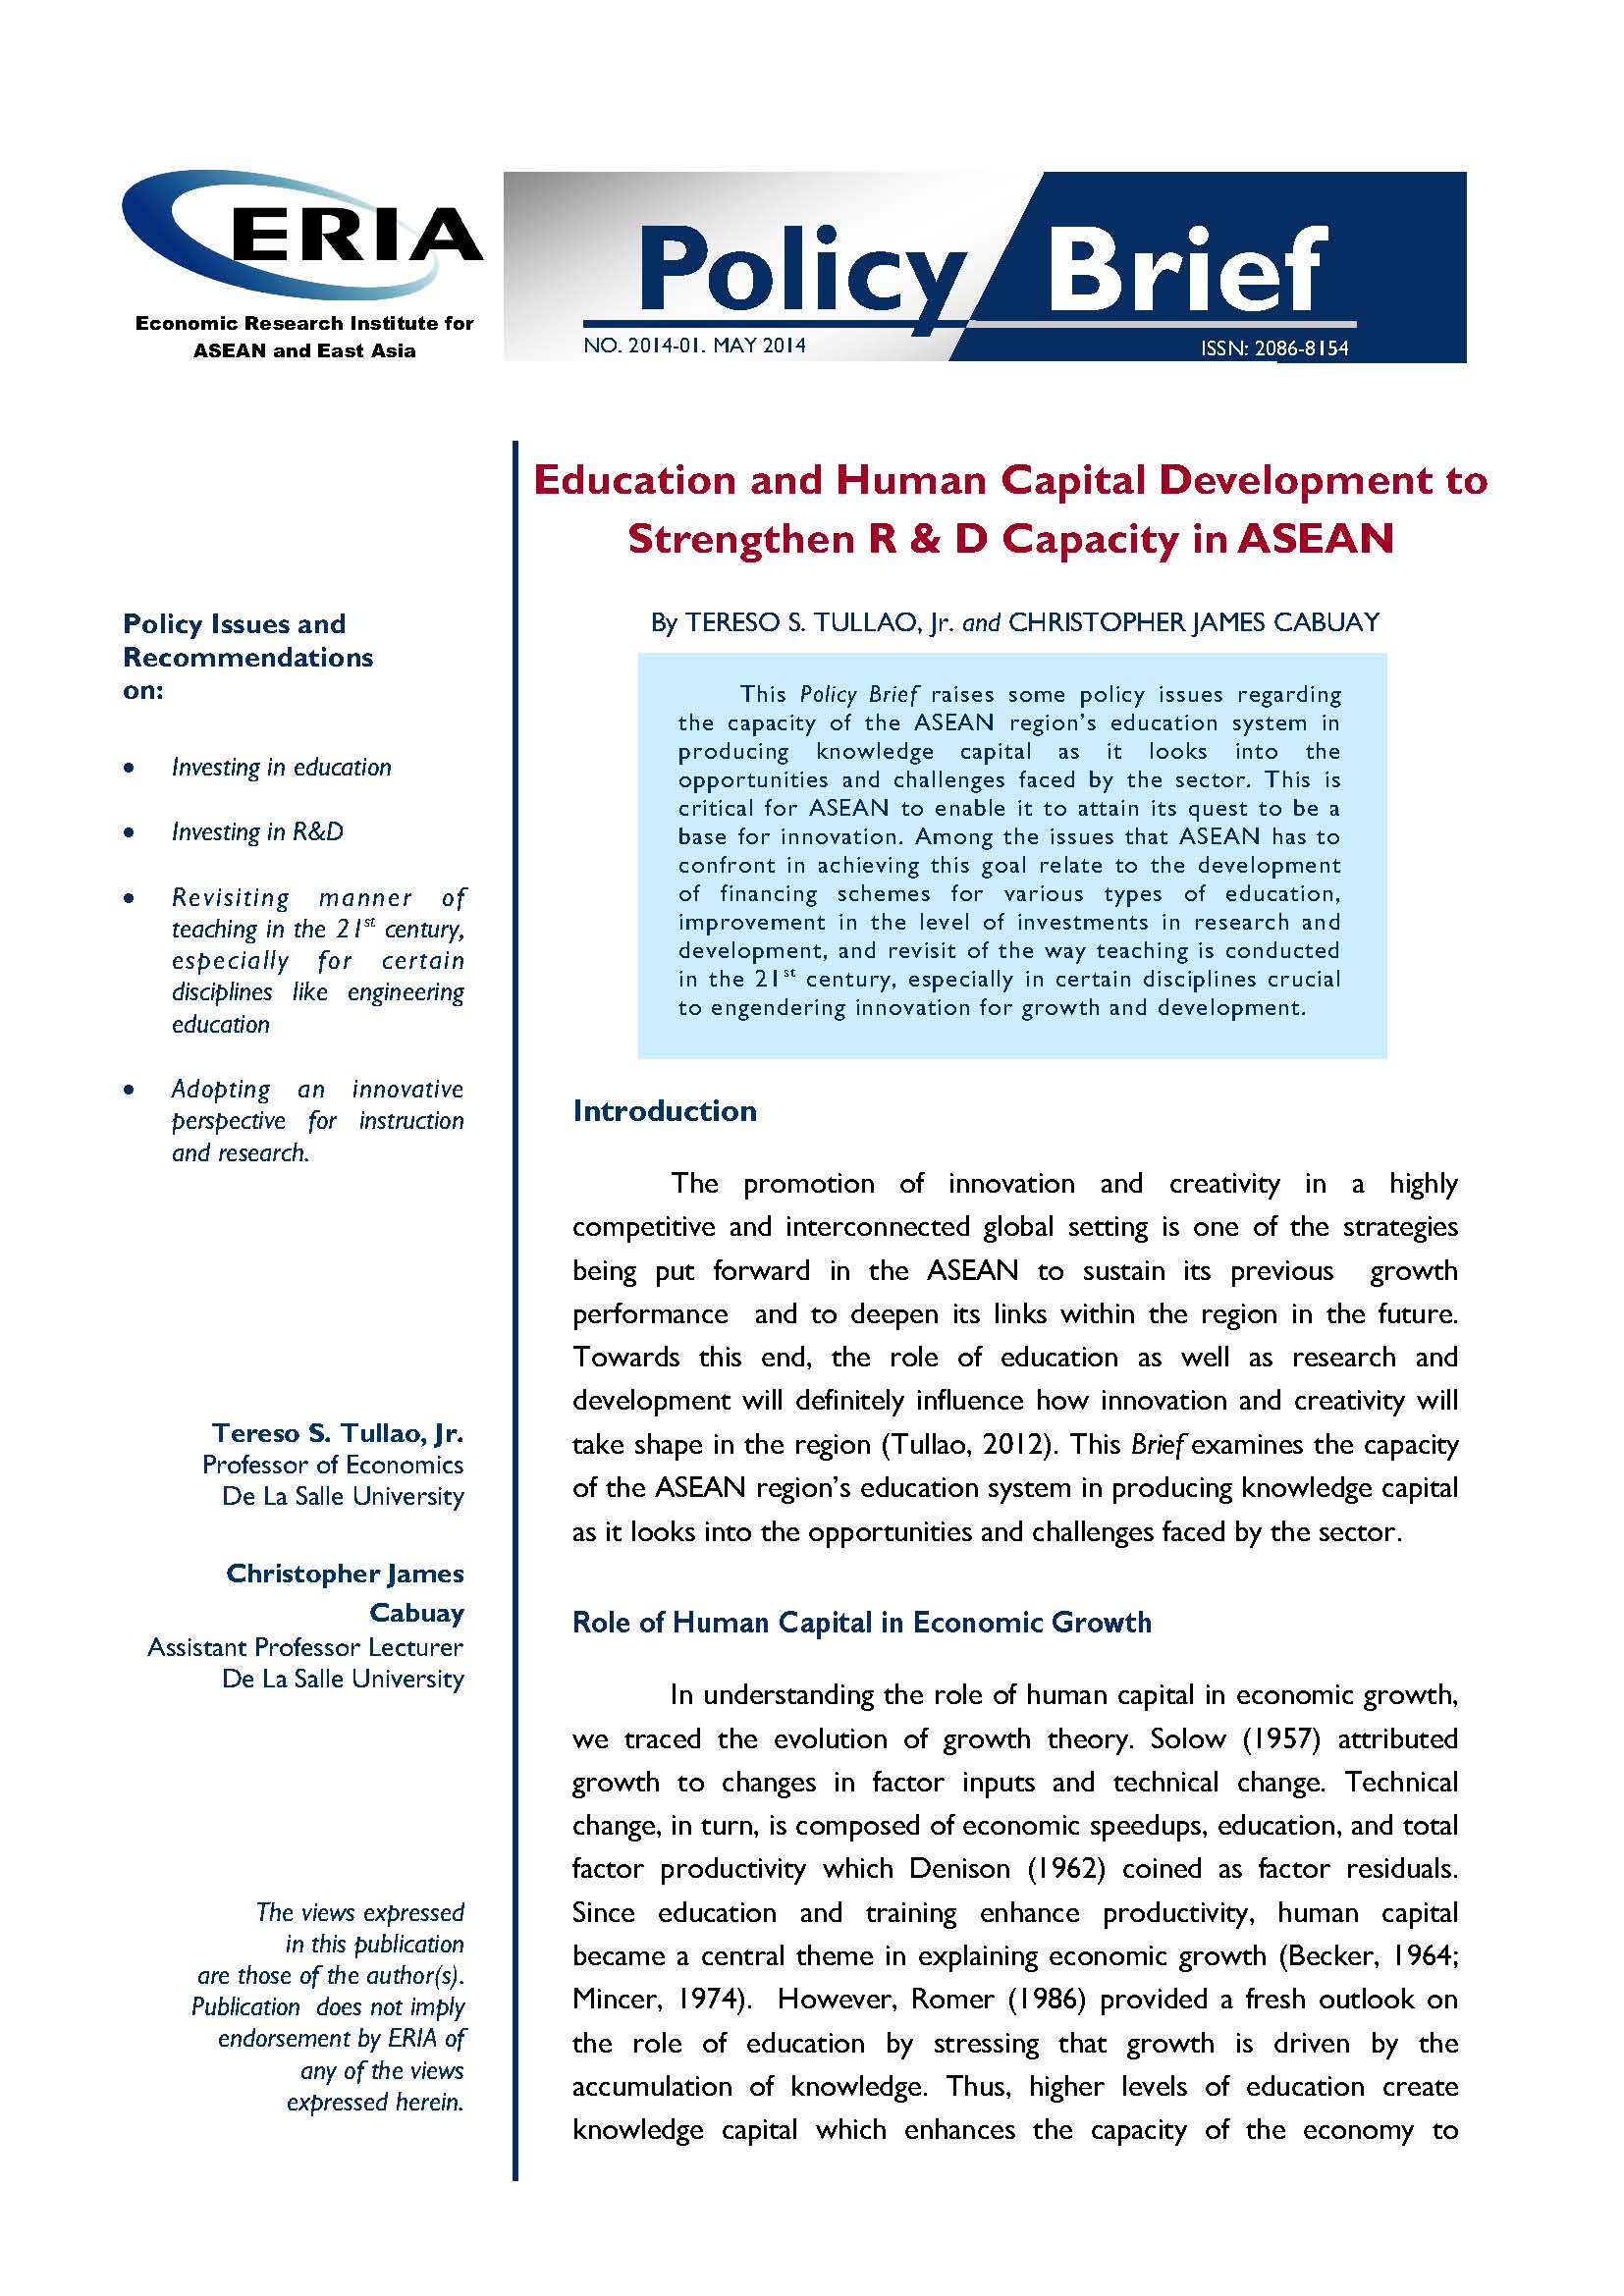 Education and Human Capital Development to Strengthen R & D Capacity in ASEAN